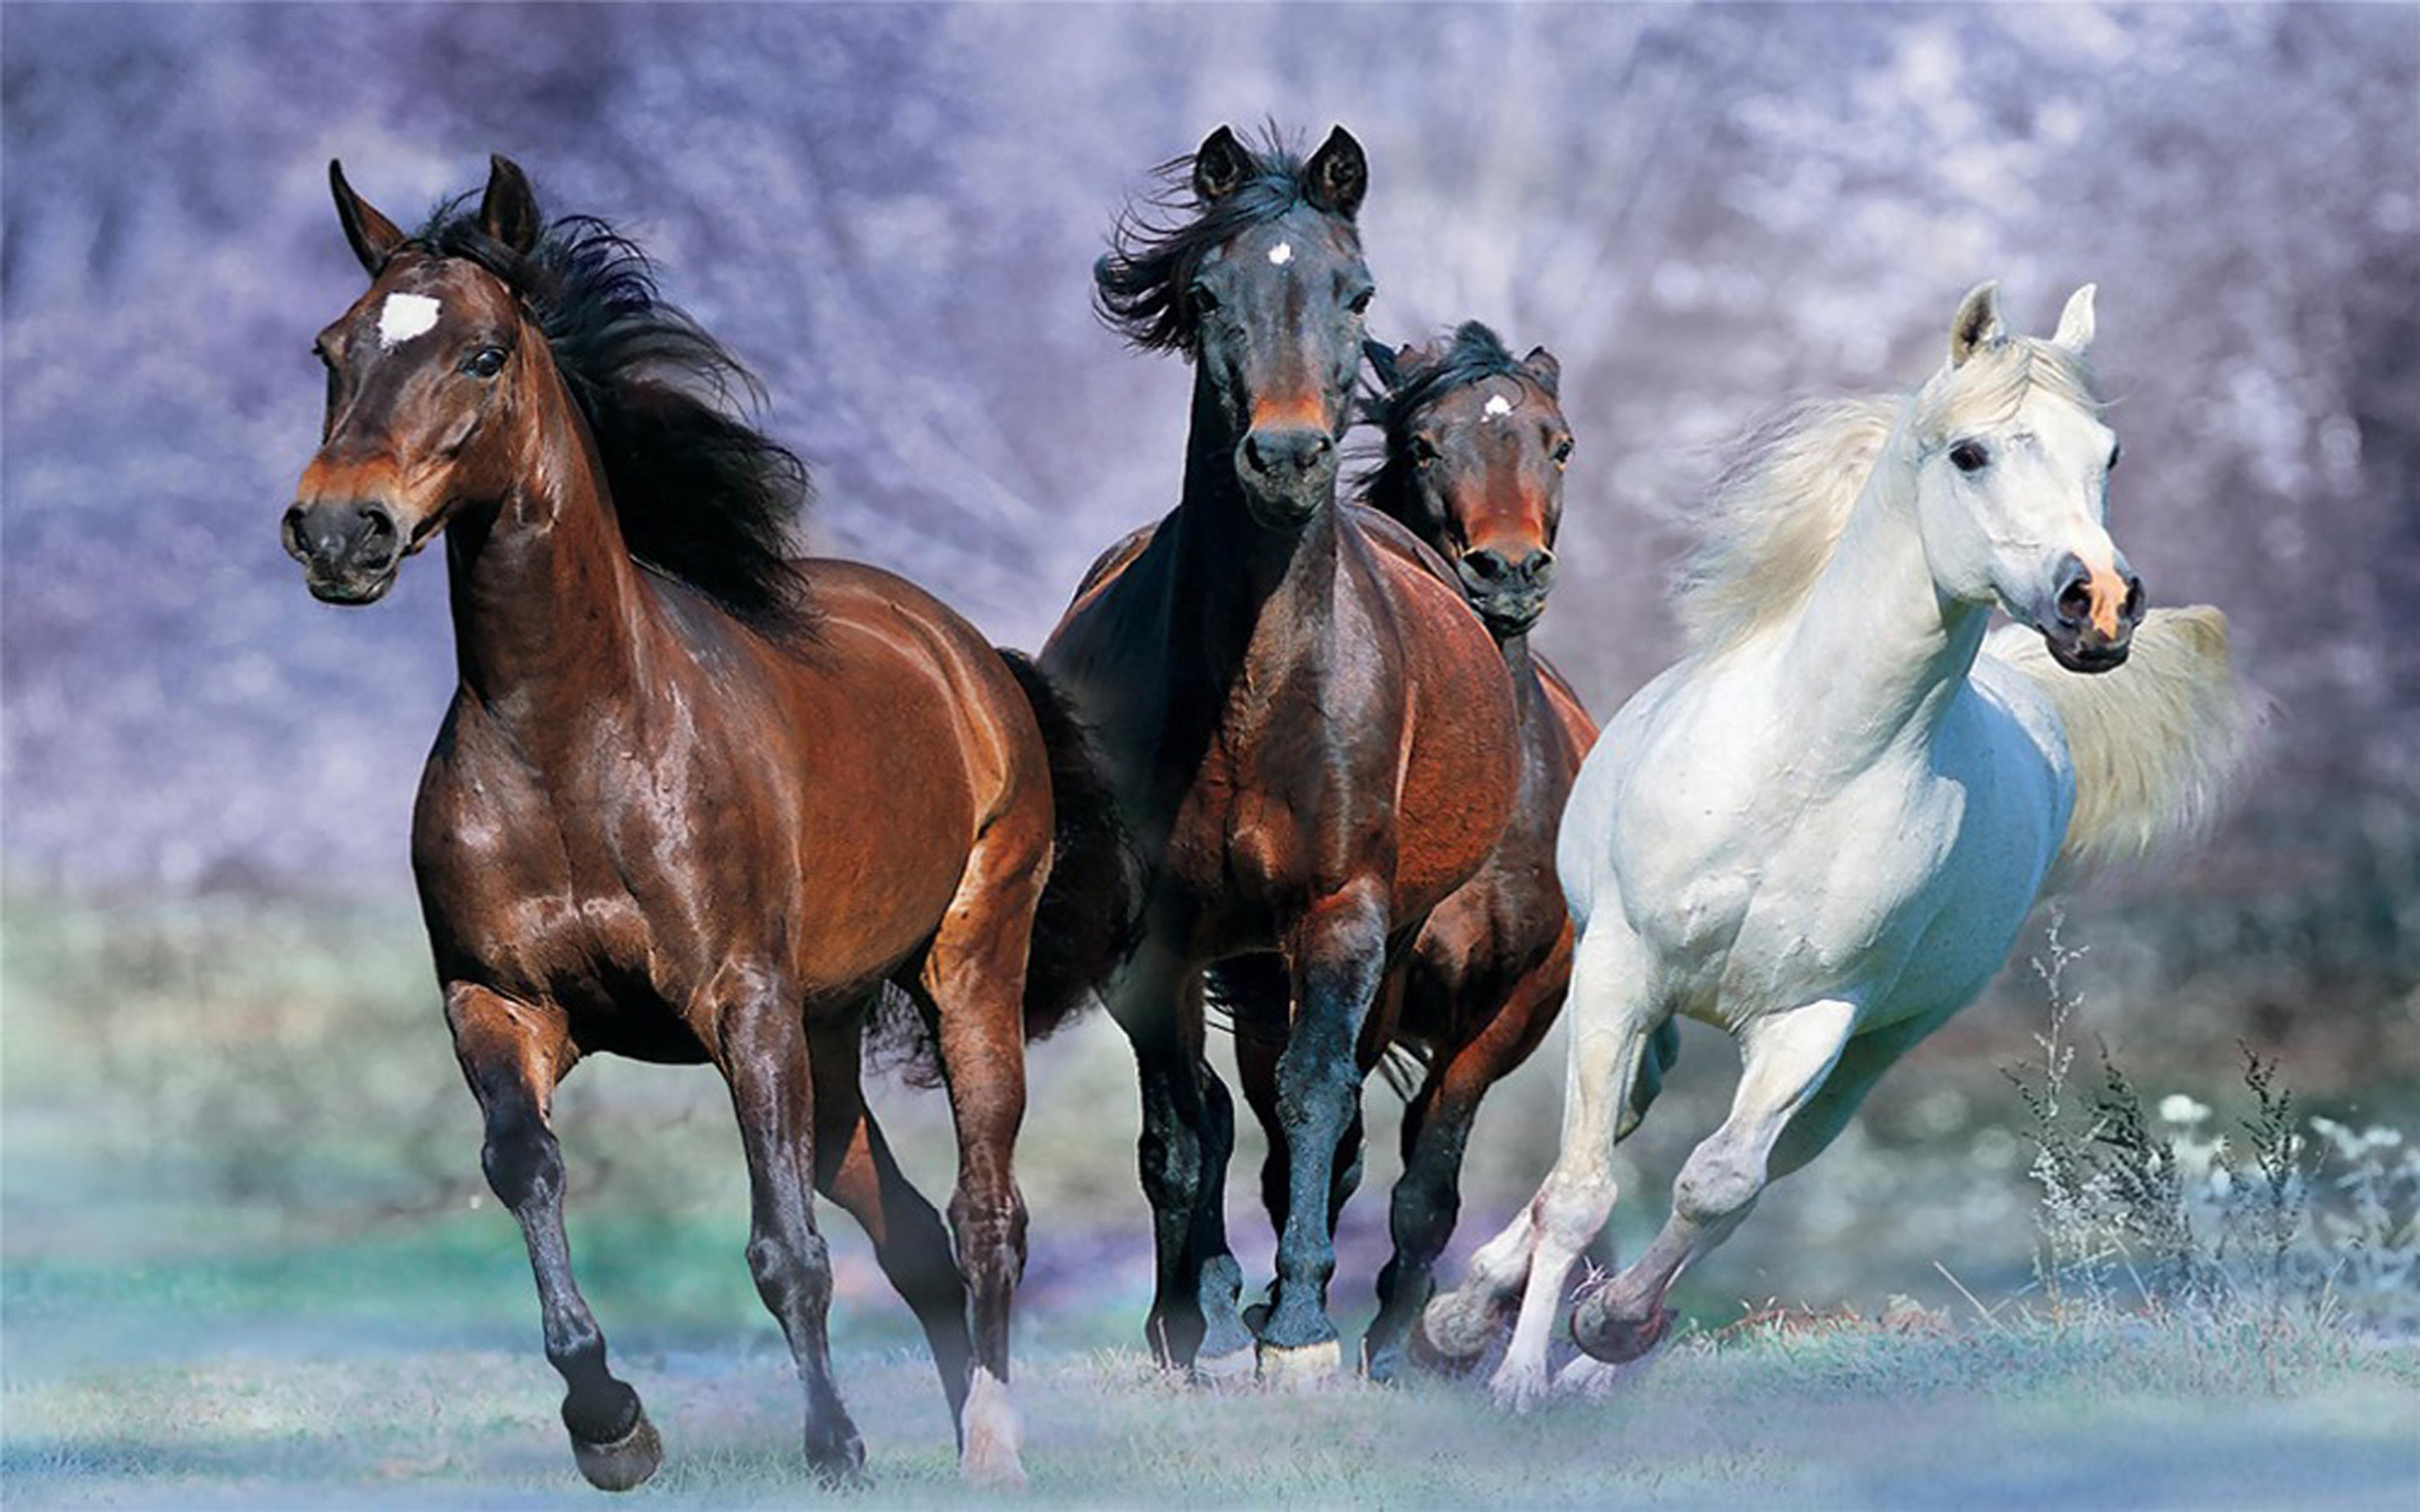 Galloping Horse Wallpapers - Top Free Galloping Horse Backgrounds